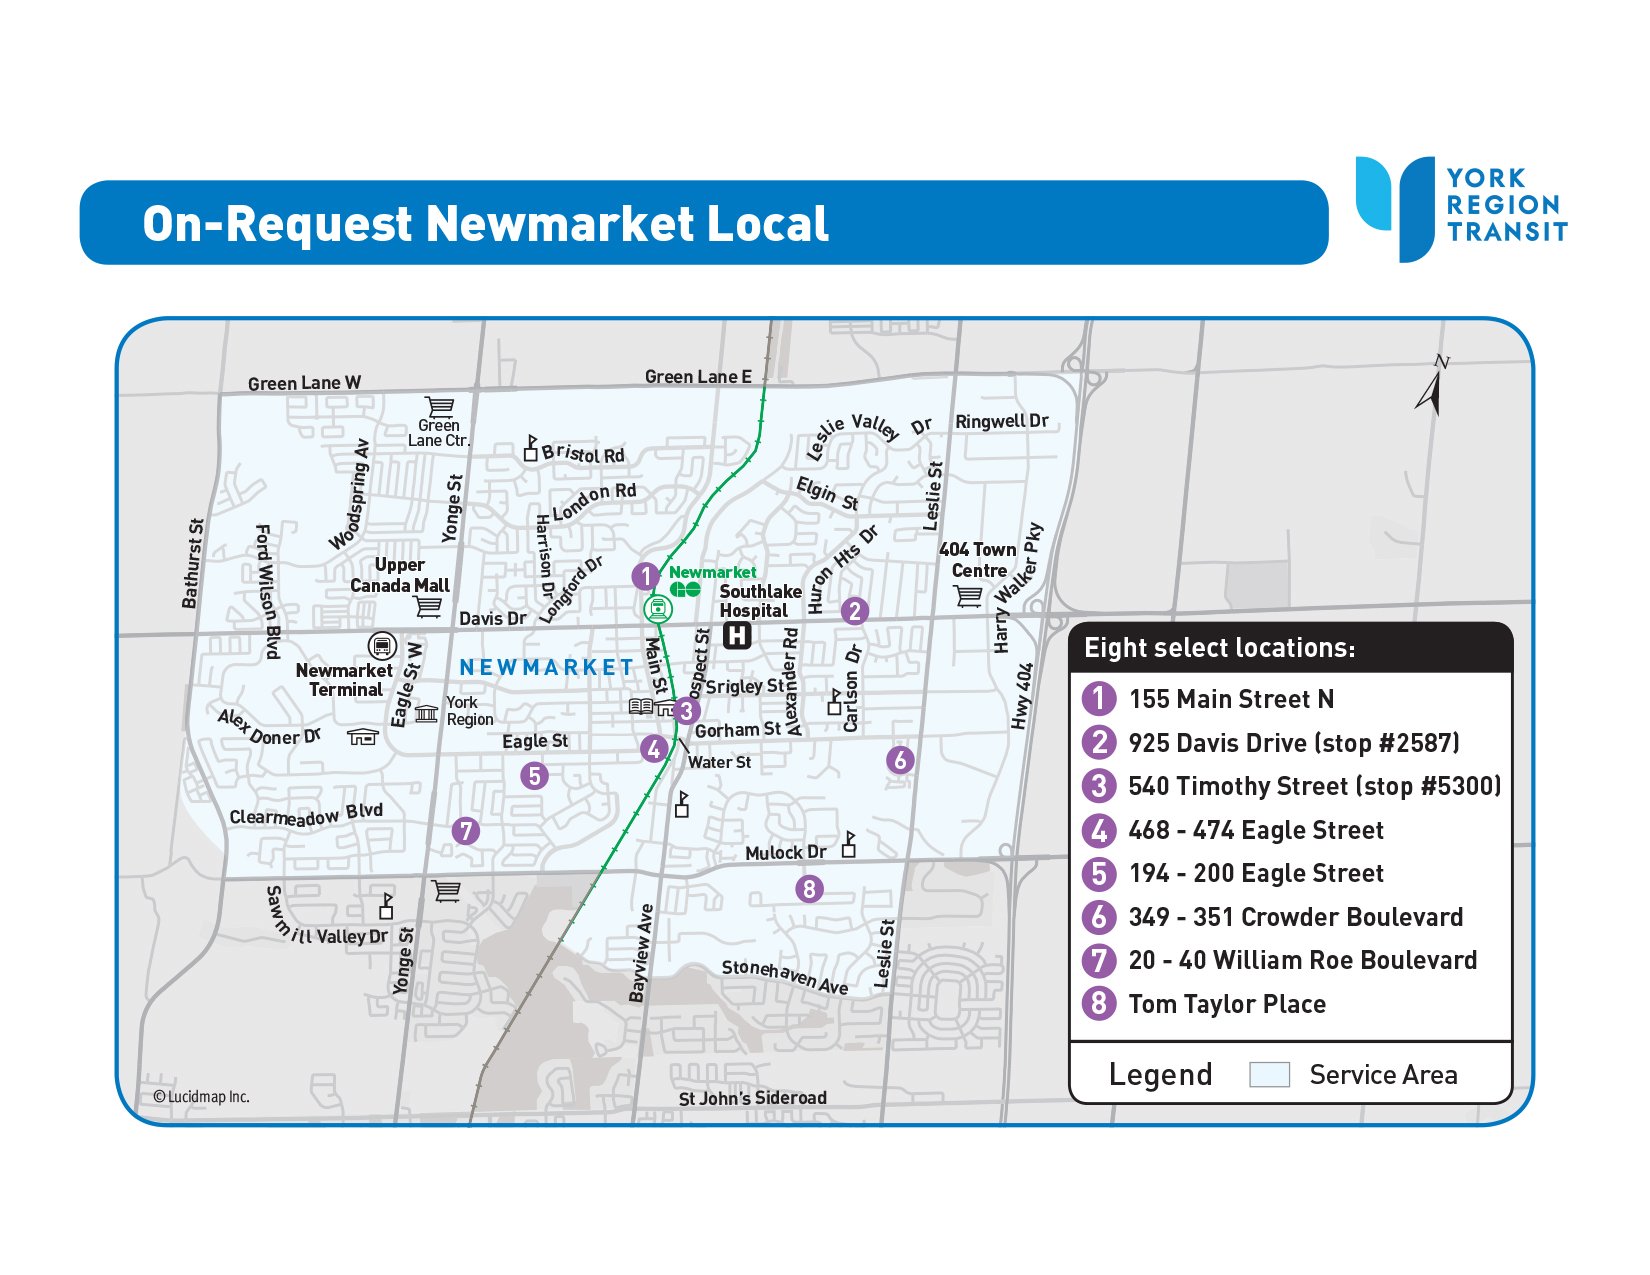 On-Request Newmarket Local service area map